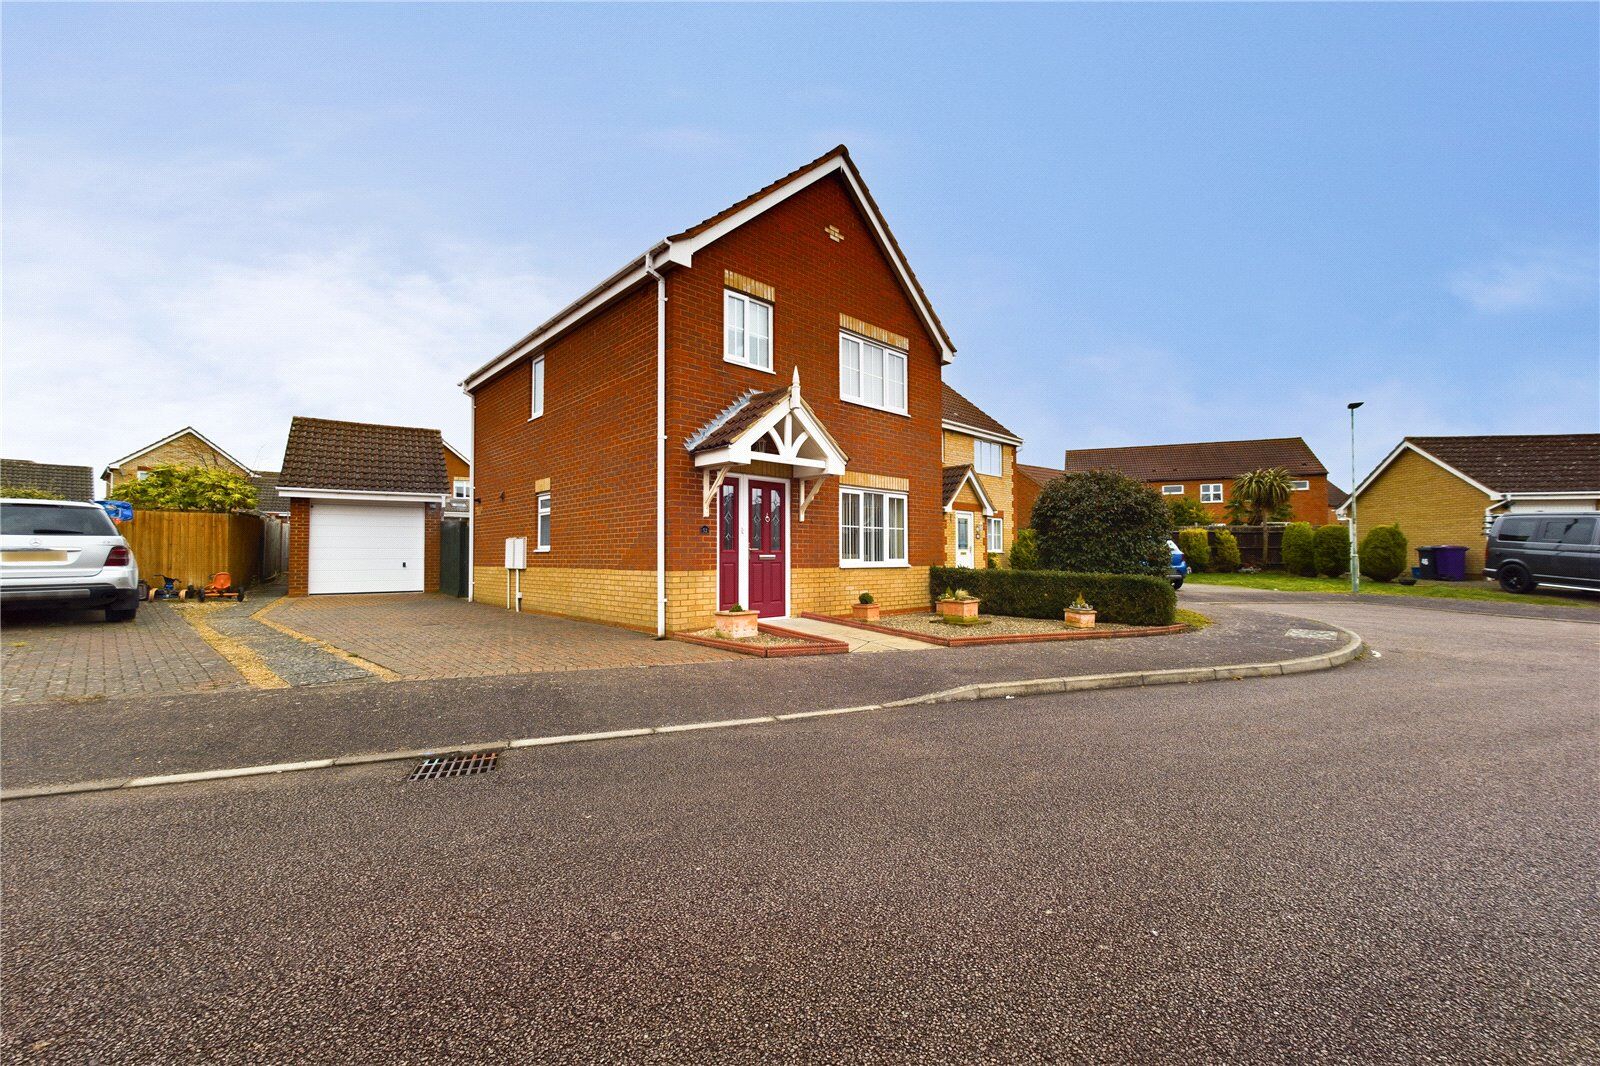 3 bedroom detached house for sale Redwing Rise, Royston, SG8, main image